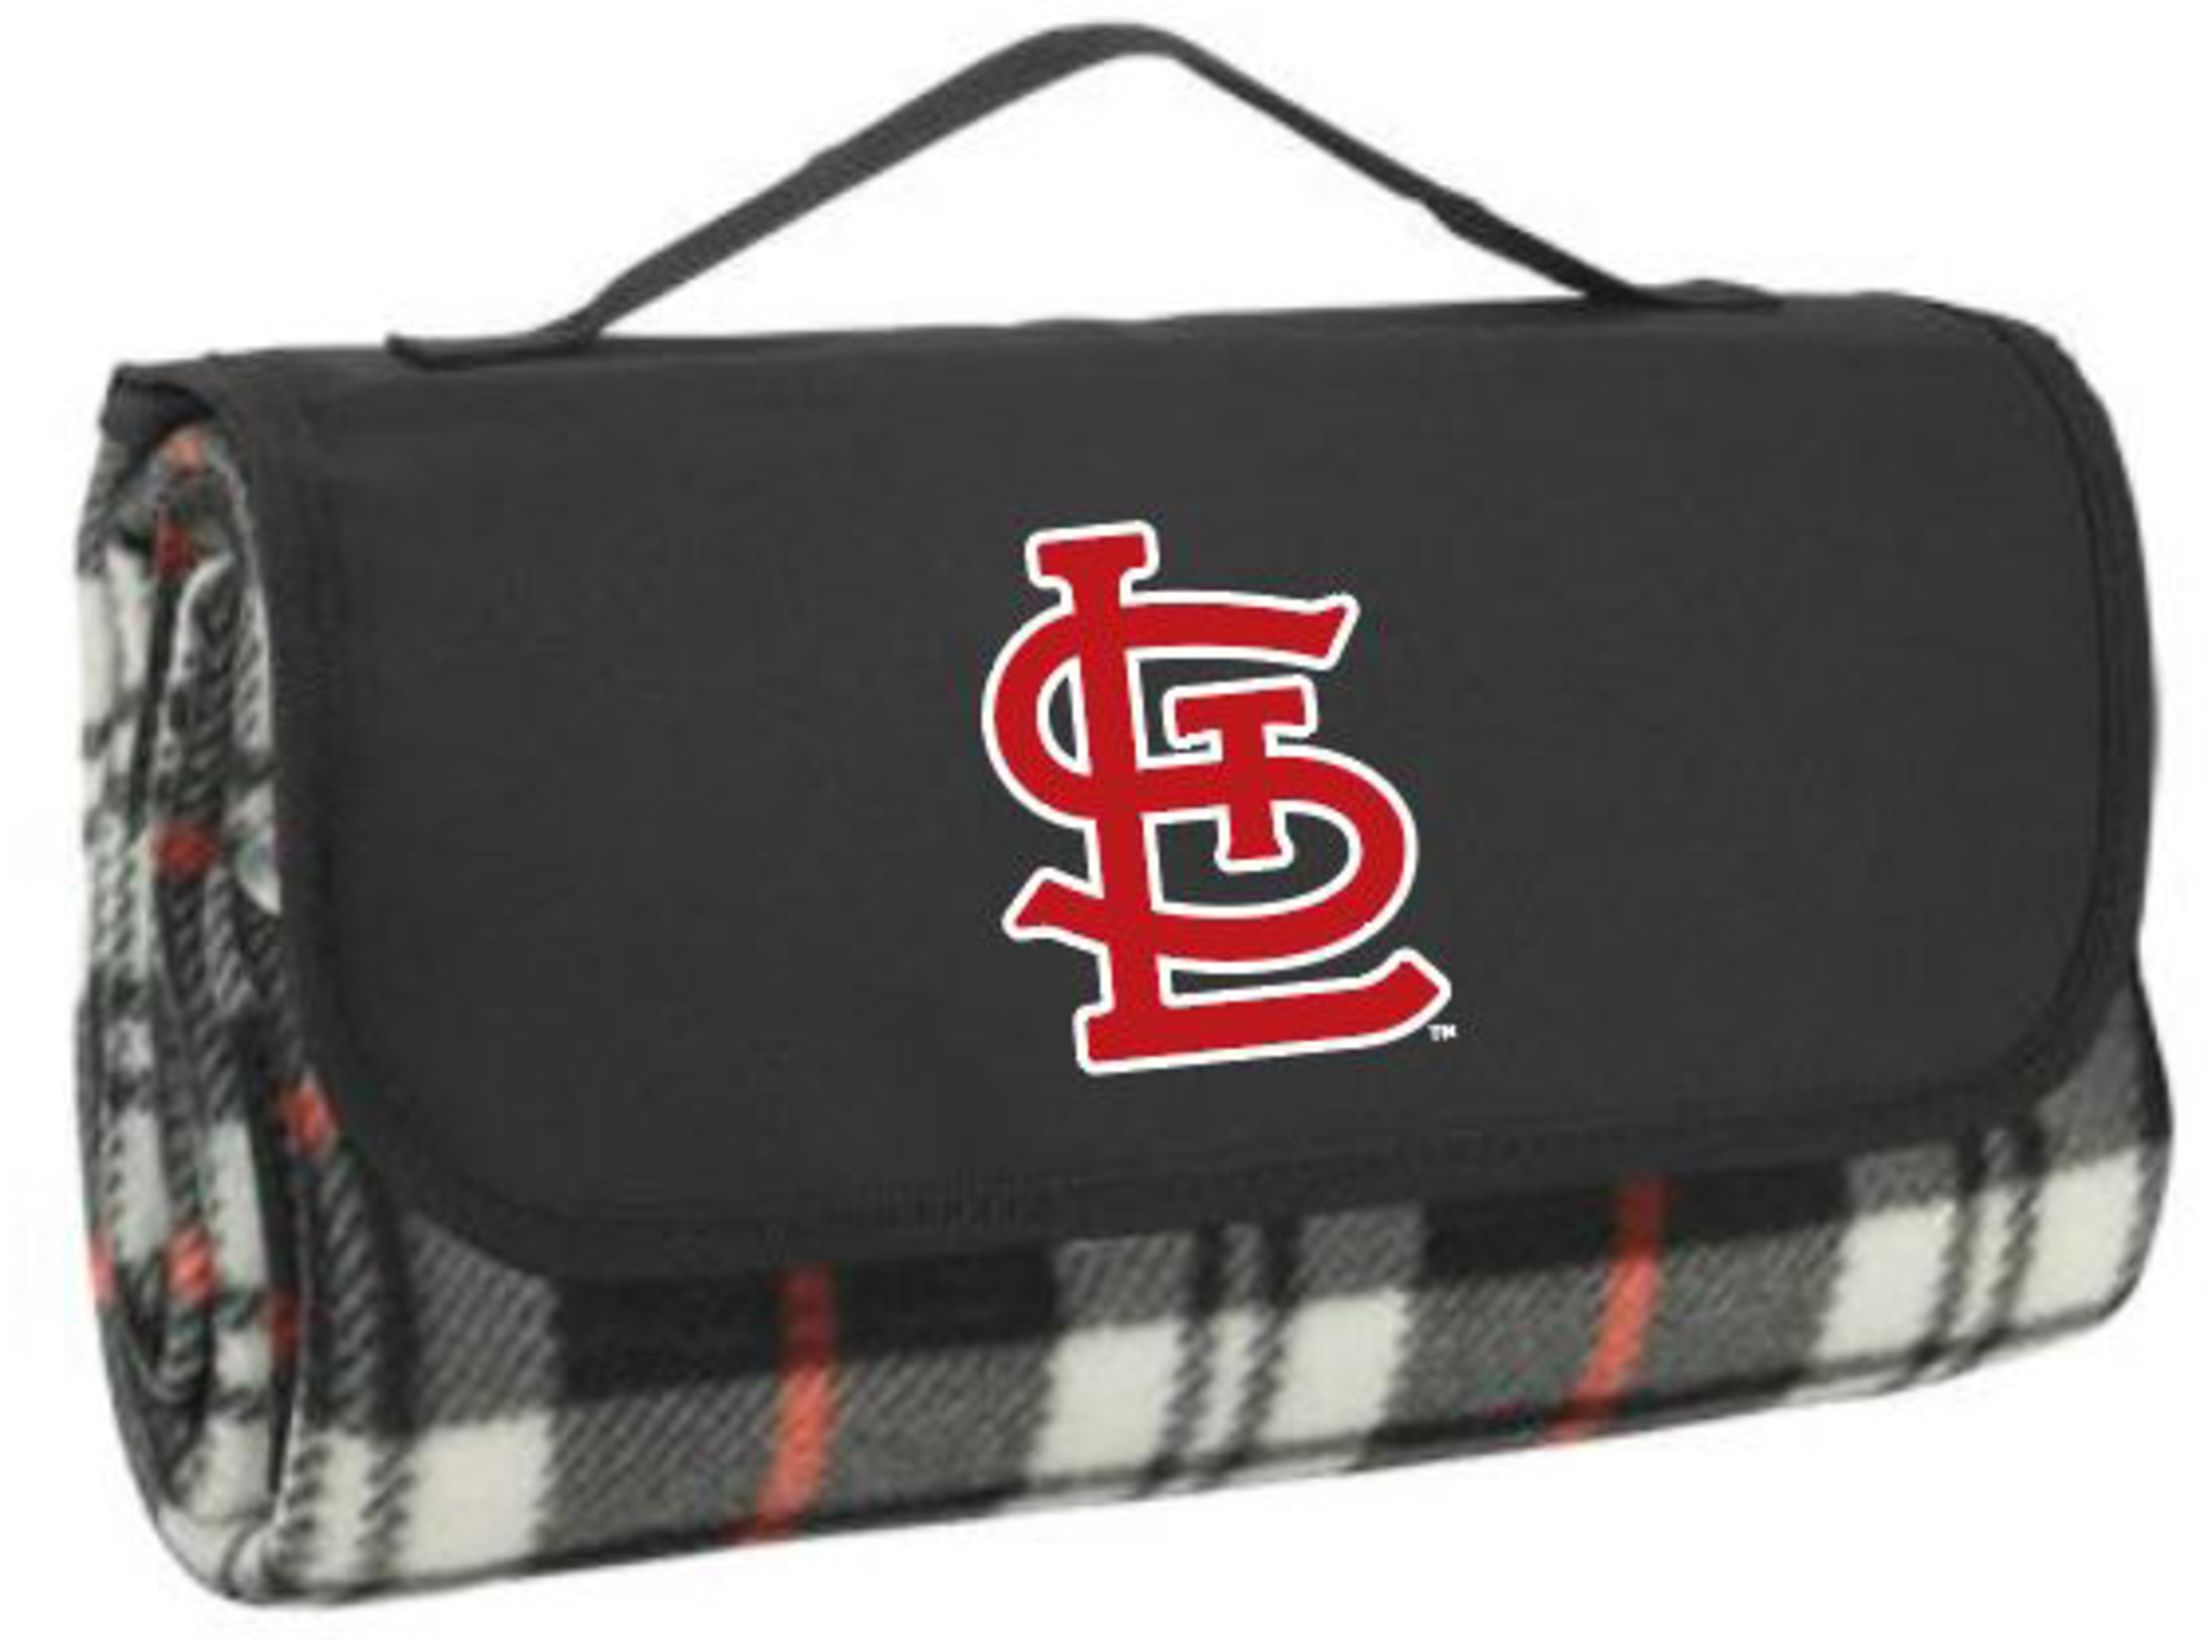 St. Louis Cardinals - New for 2017: backpacks & ice packs will not be  permitted inside Busch Stadium. Duffels, totes, cinch bags & purses are OK.  Food and drink are still permitted